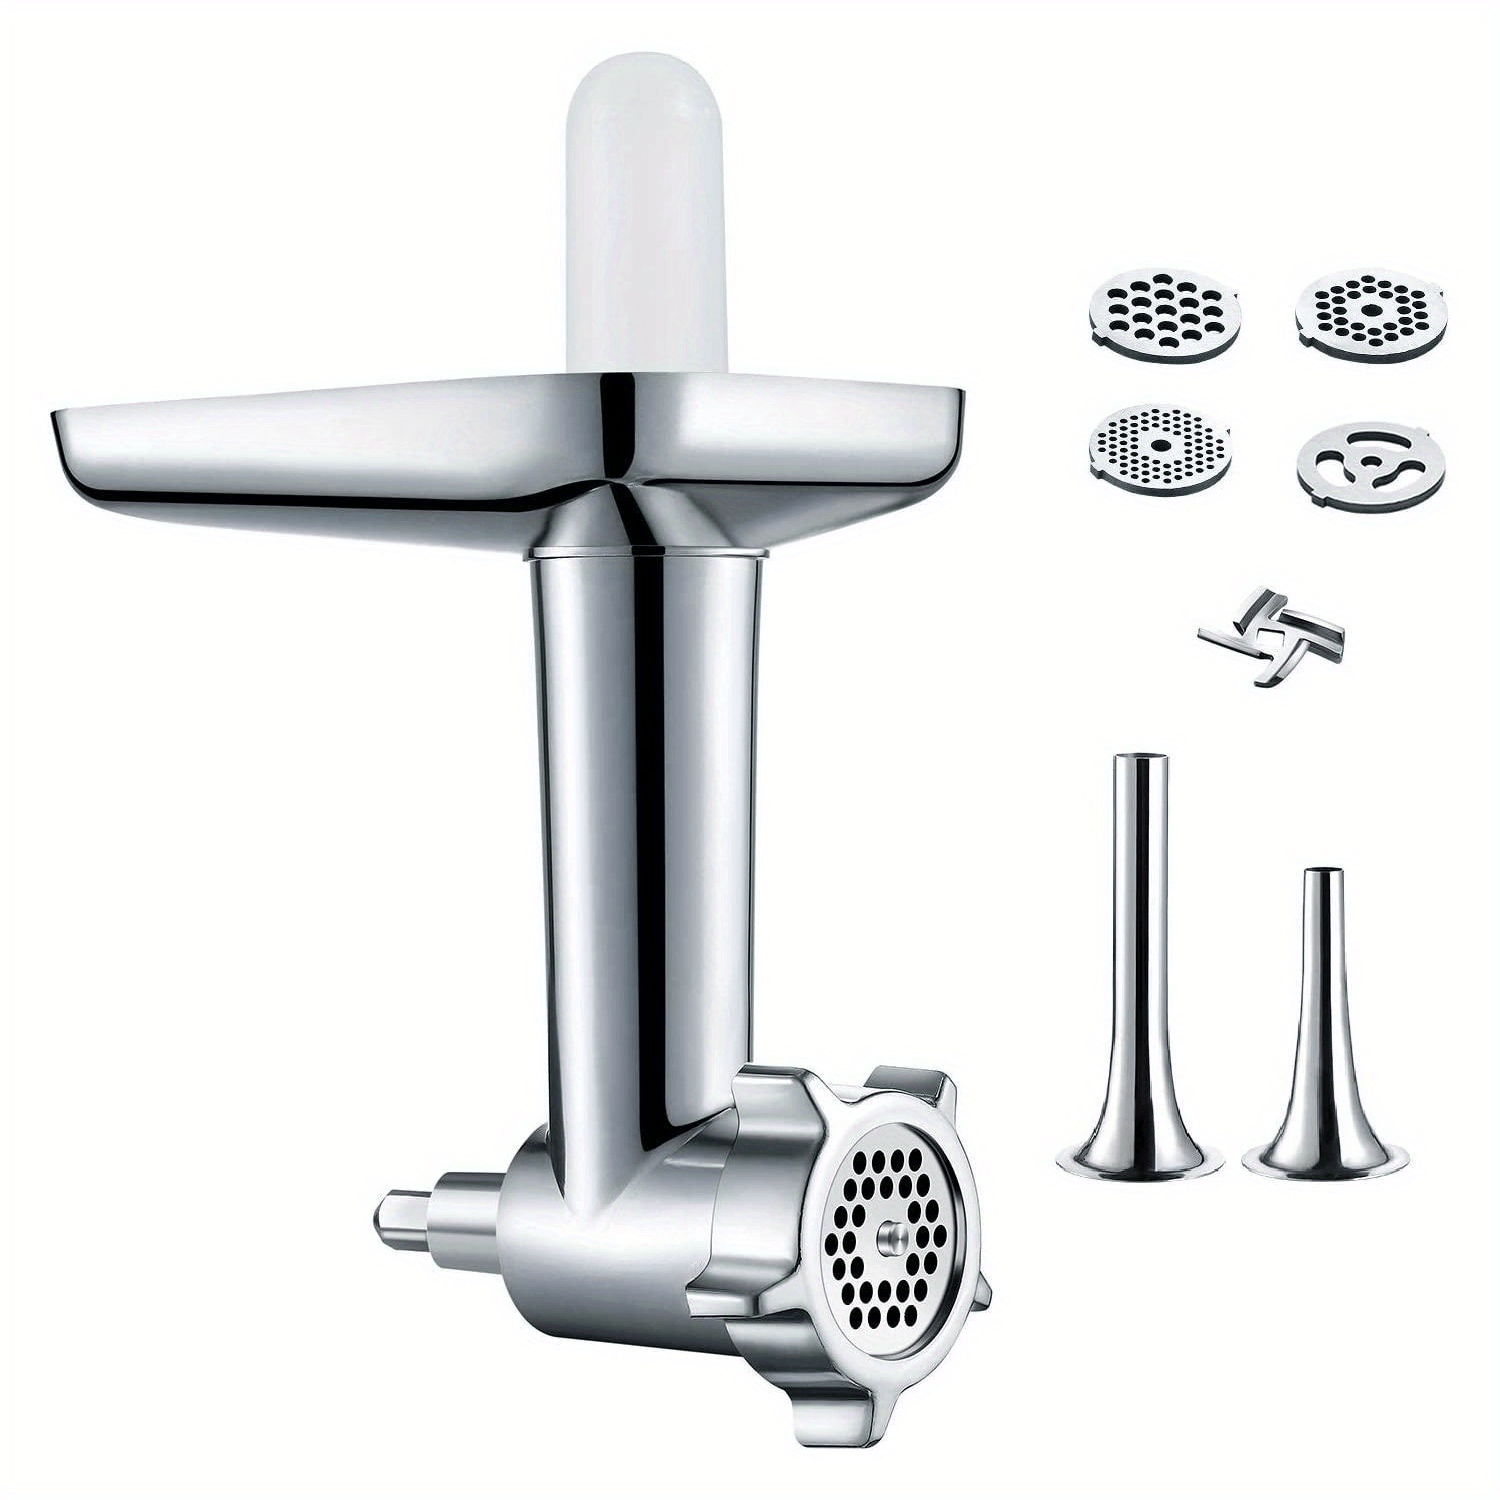 GVODE Metal Food Grinder Attachment for KitchenAid Stand Mixers